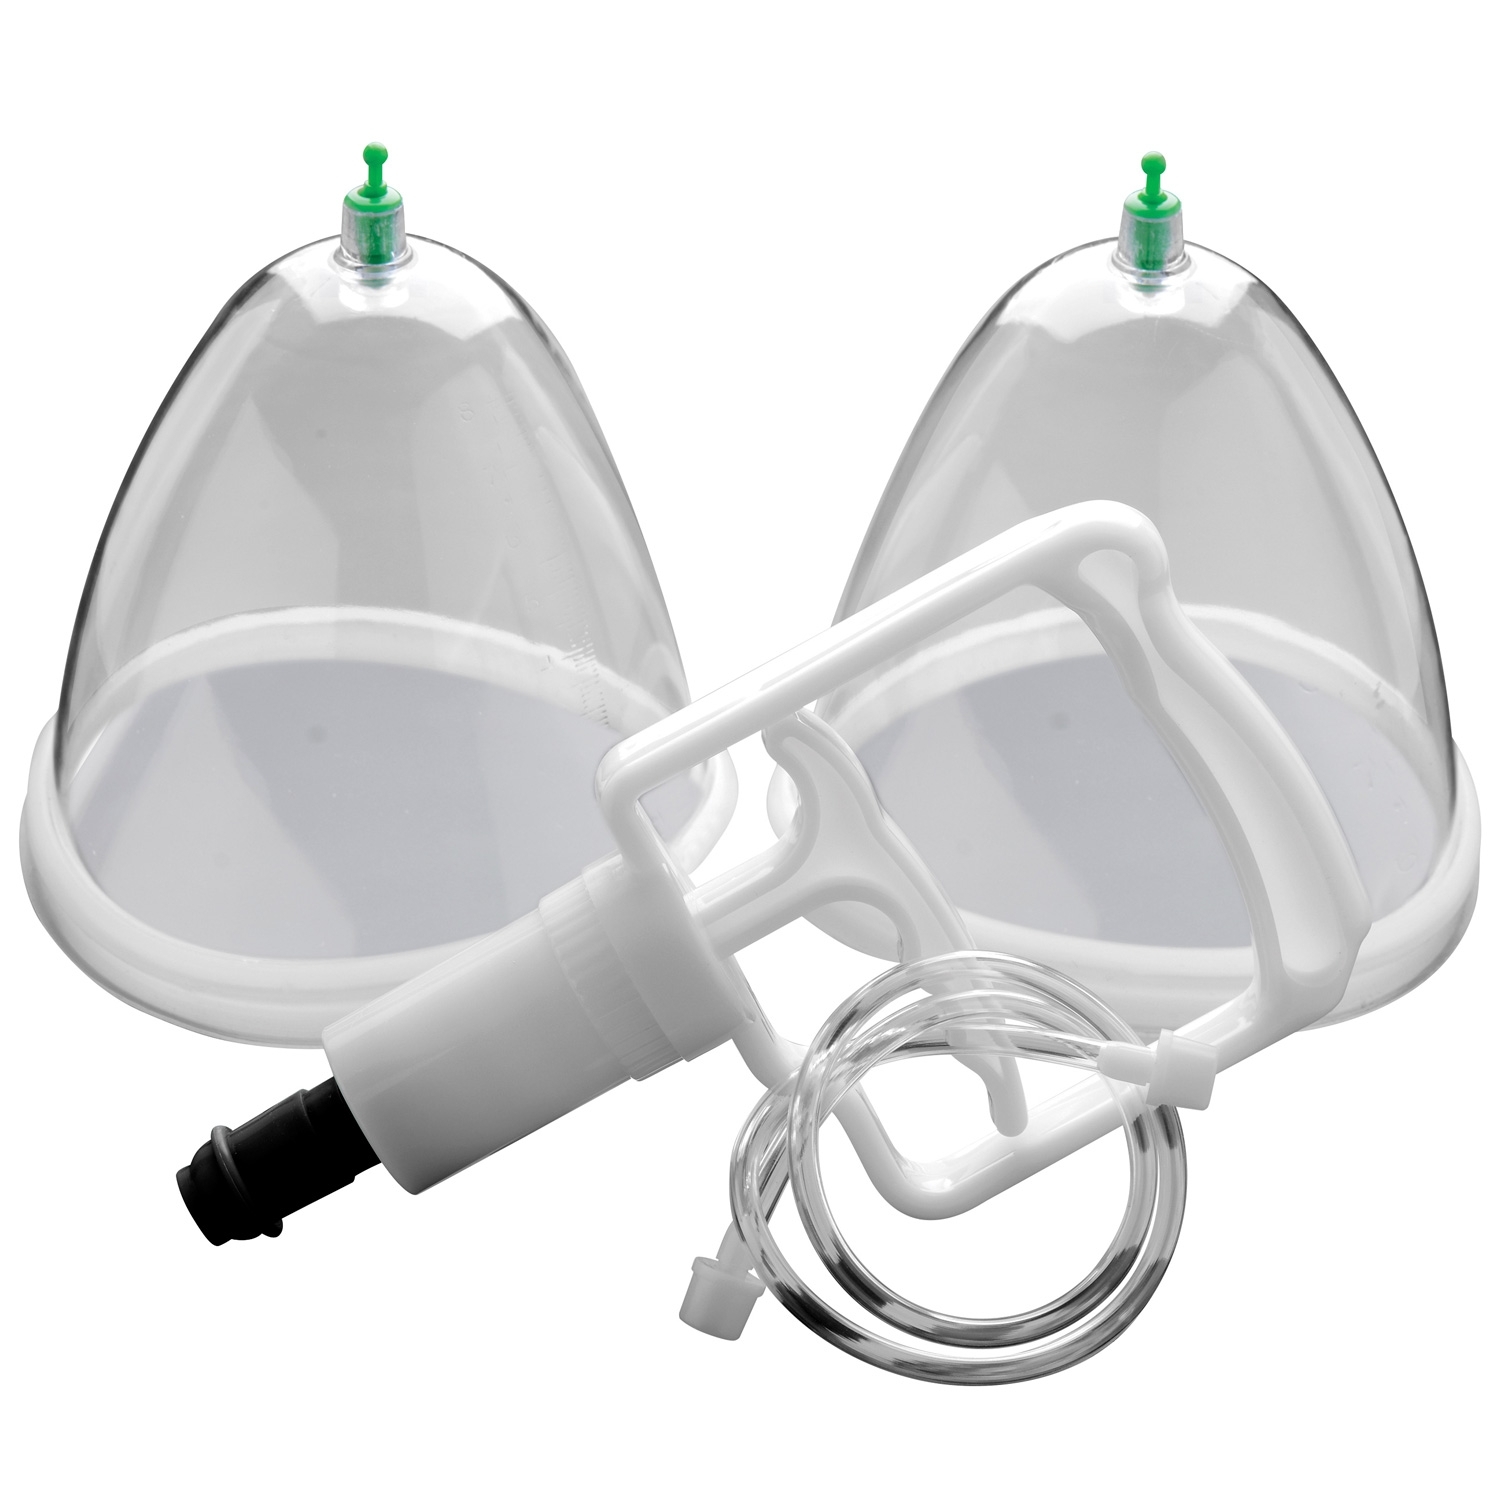 Size Matters Breast Cupping System - Clear thumbnail